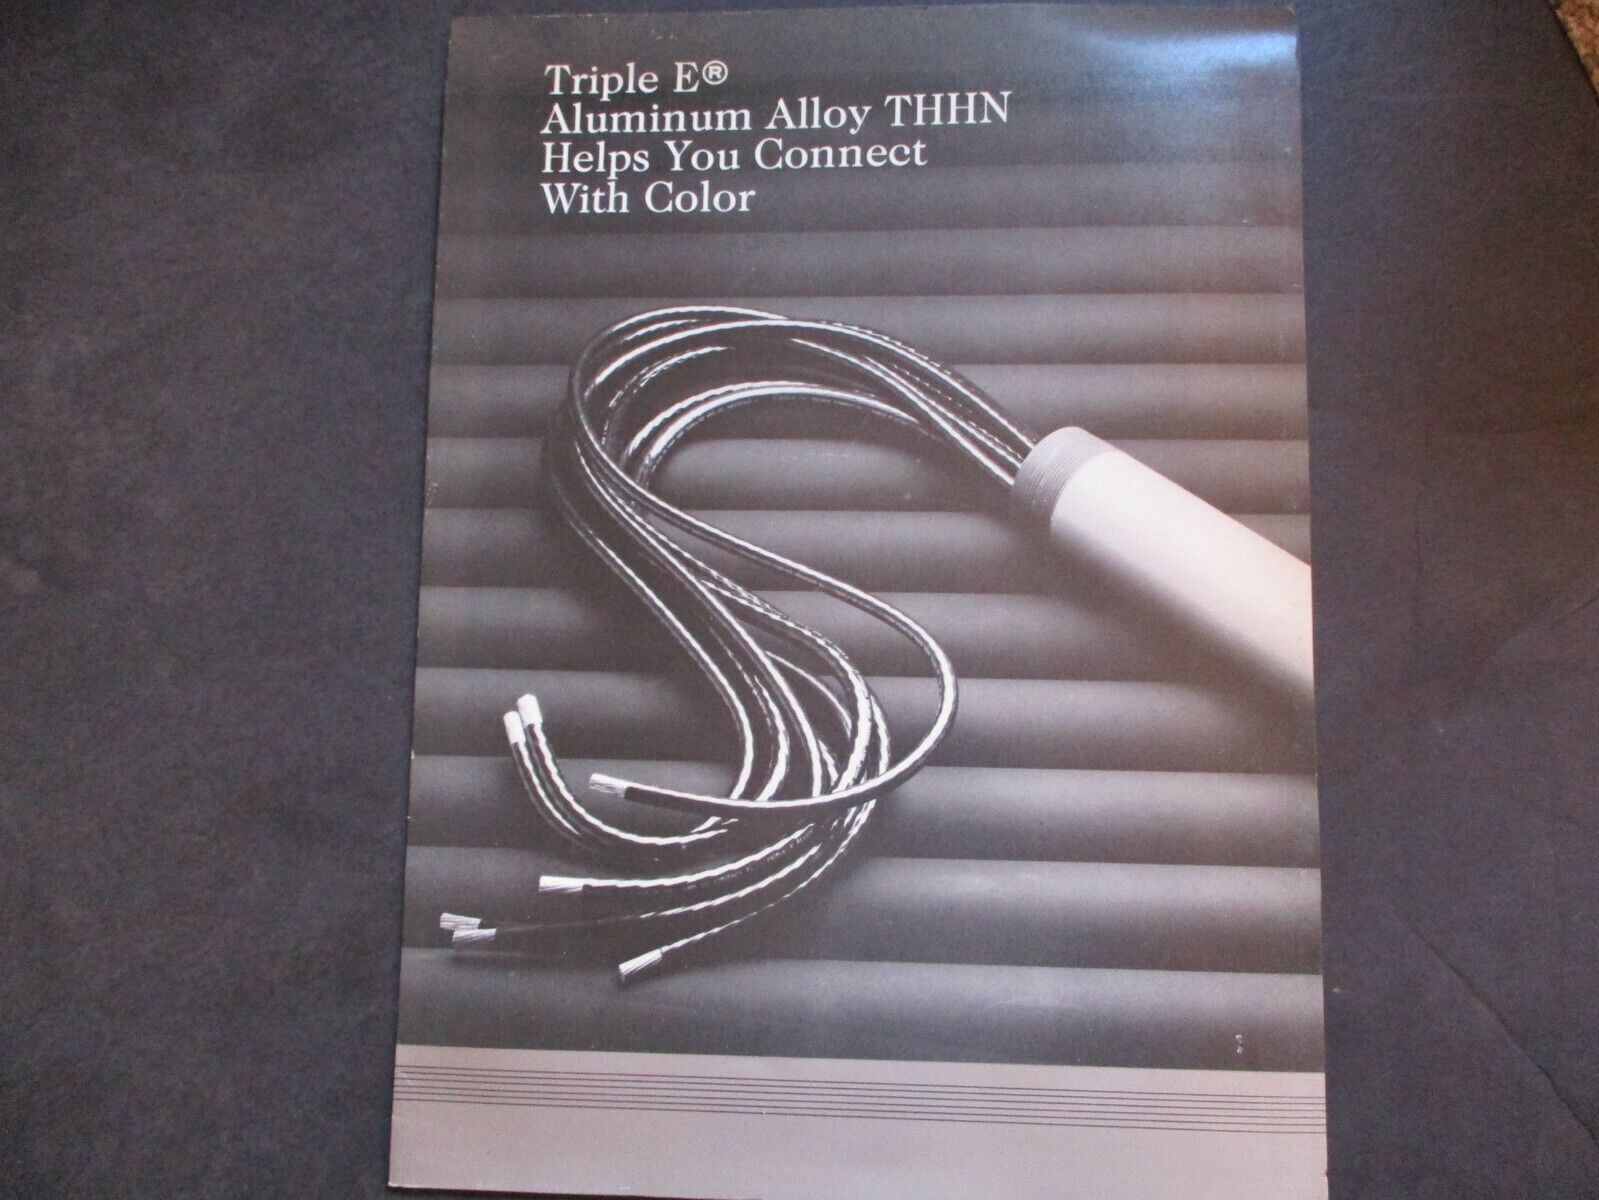 Triple E Aluminum Alloy THHN Helps You Connect With Color information guide